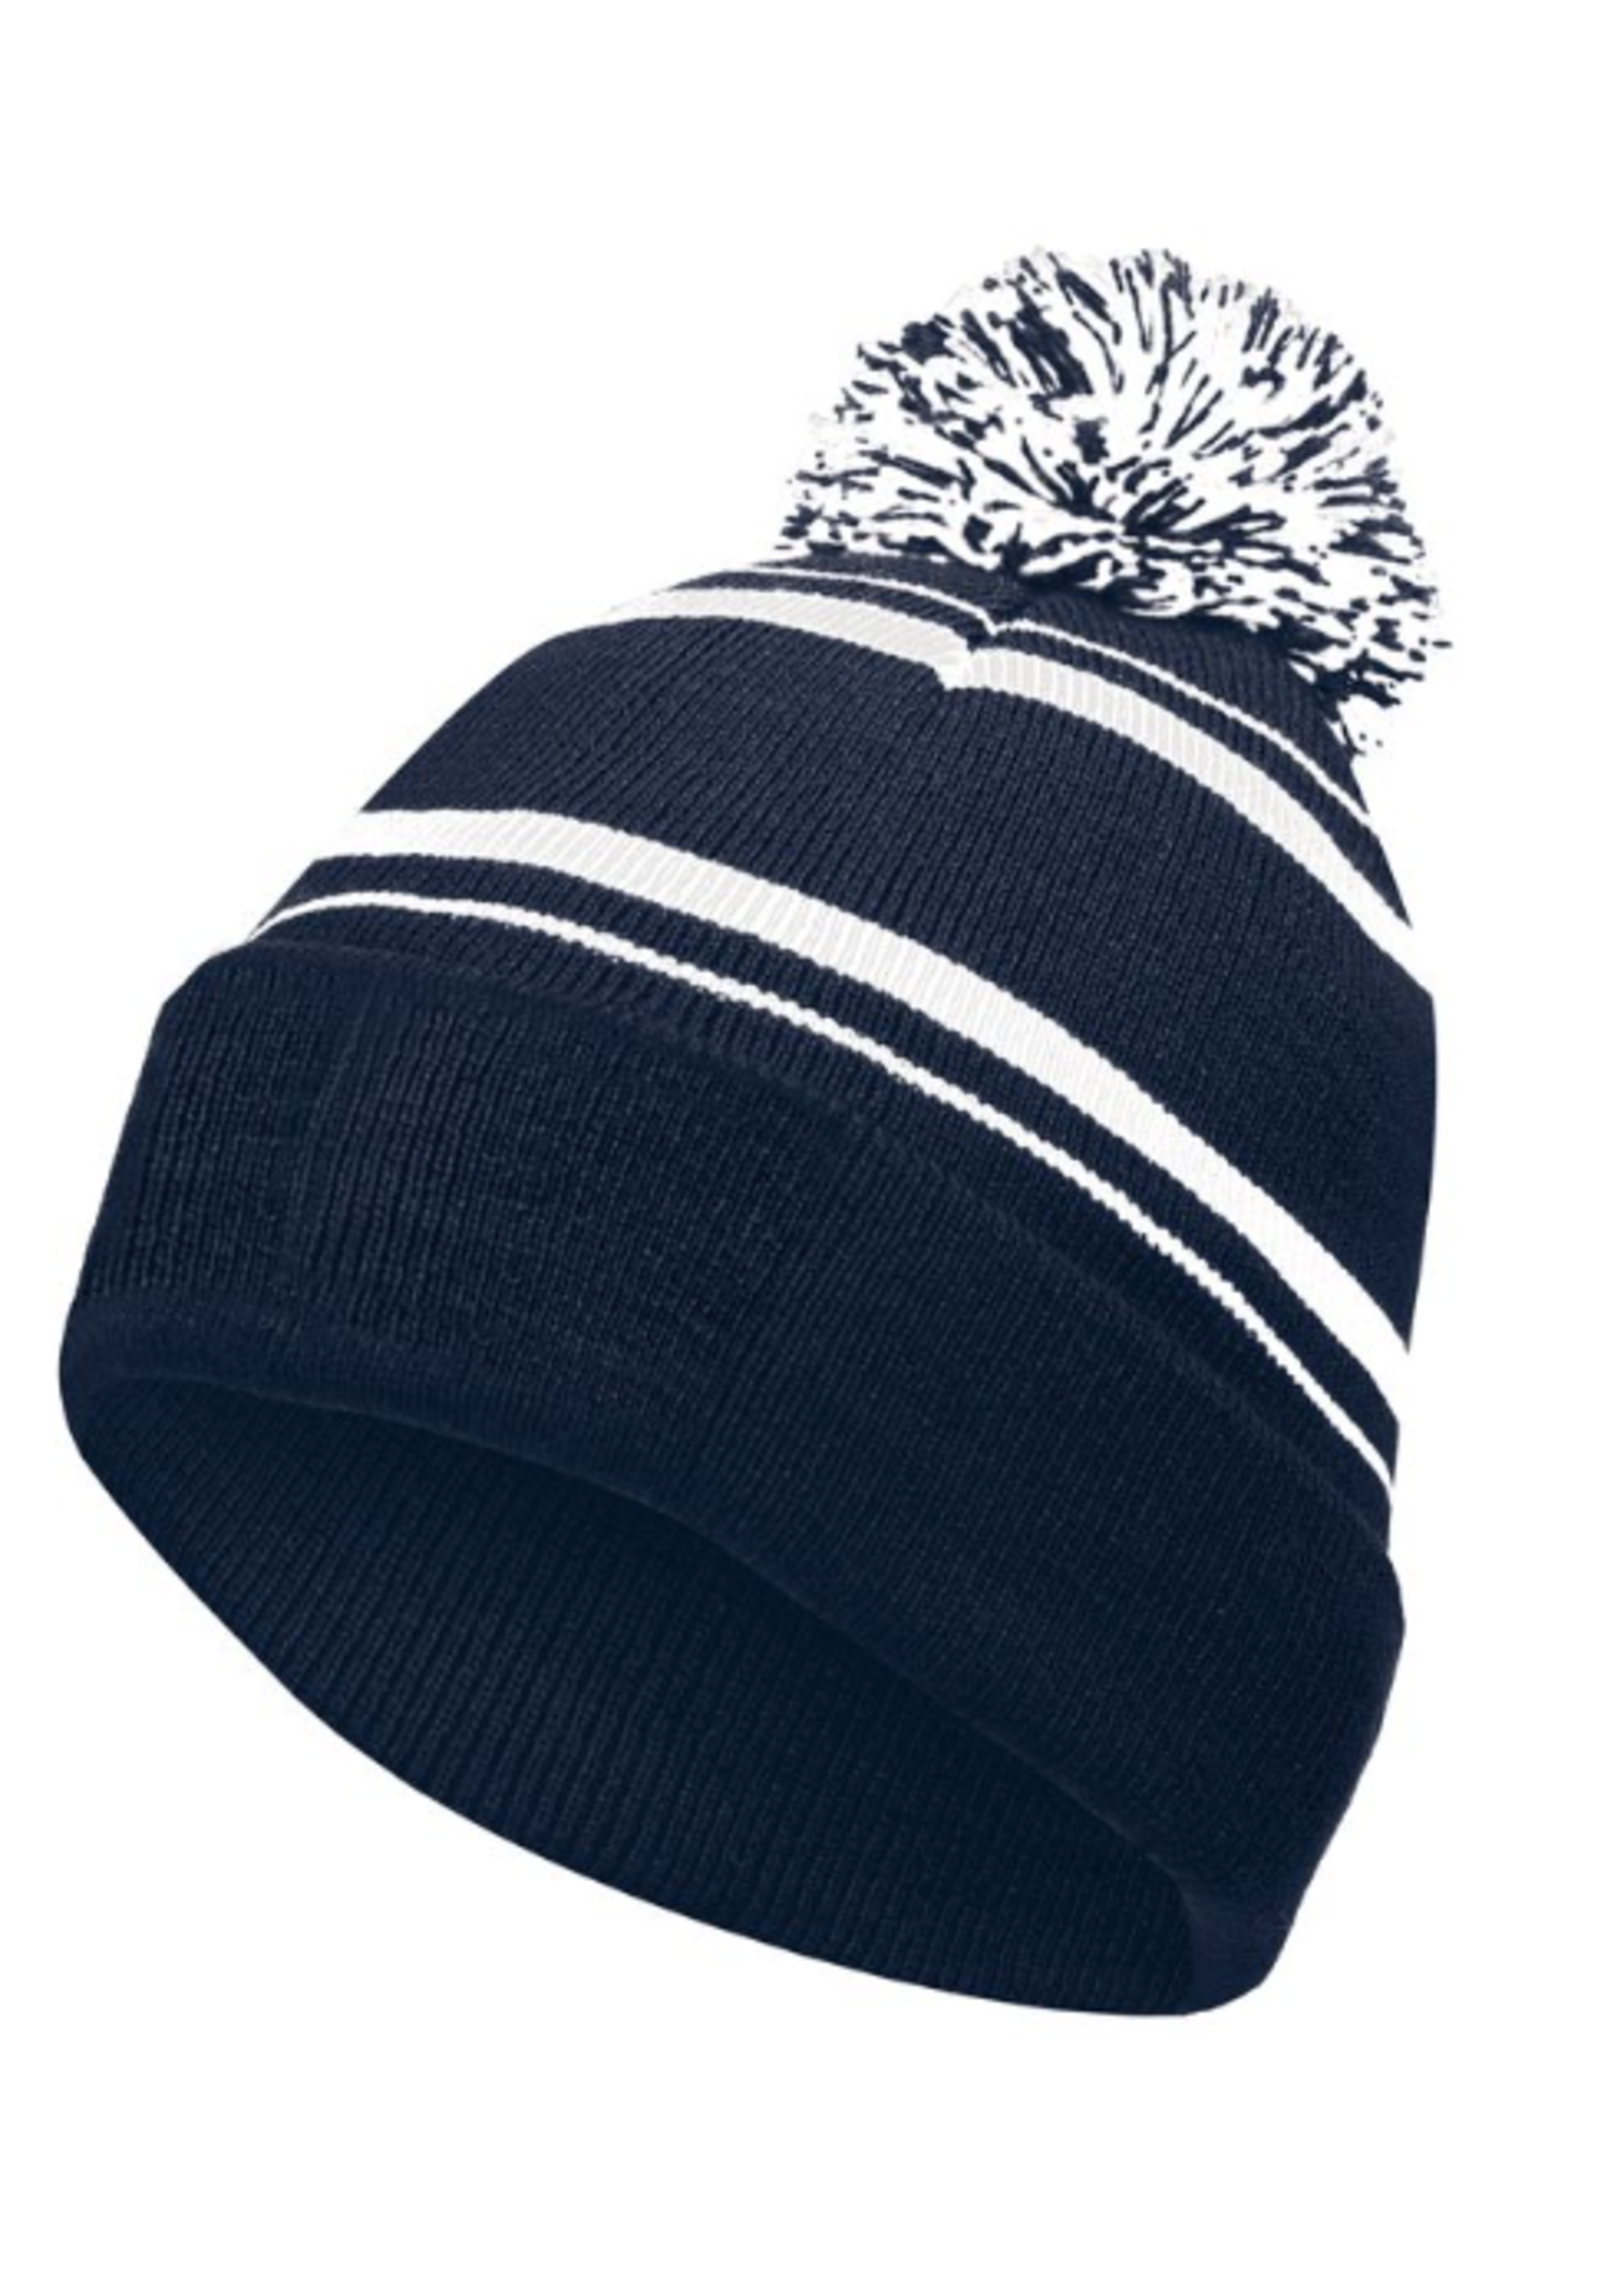 NON-UNIFORM Embroidered Knit Hat in navy, white and grey with JD Basketball embroidered